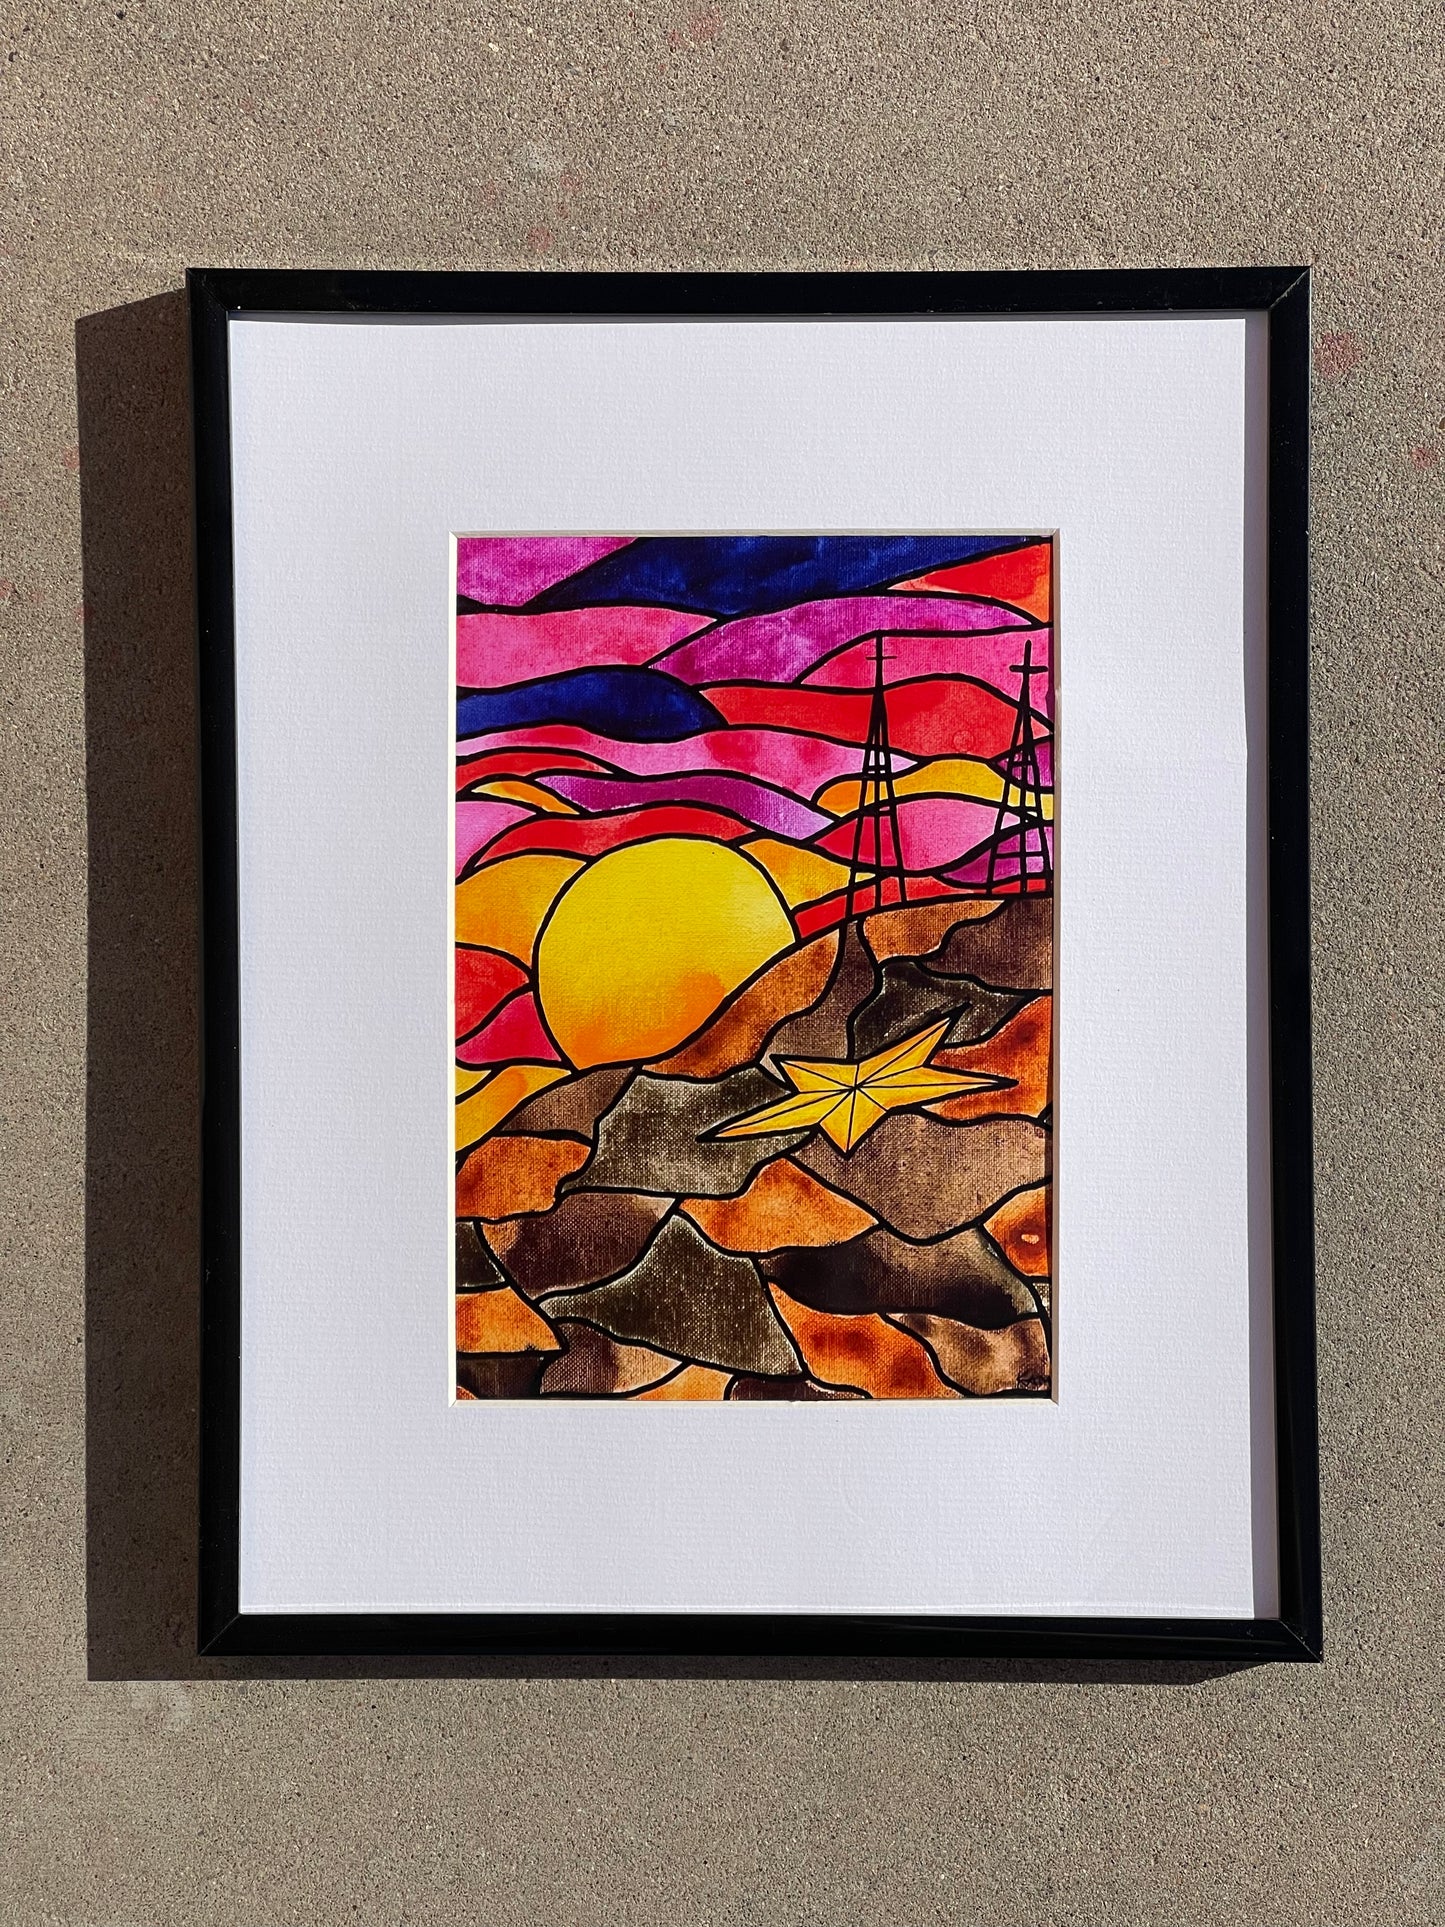 “Eternal Sunset” Framed and Matted Photo